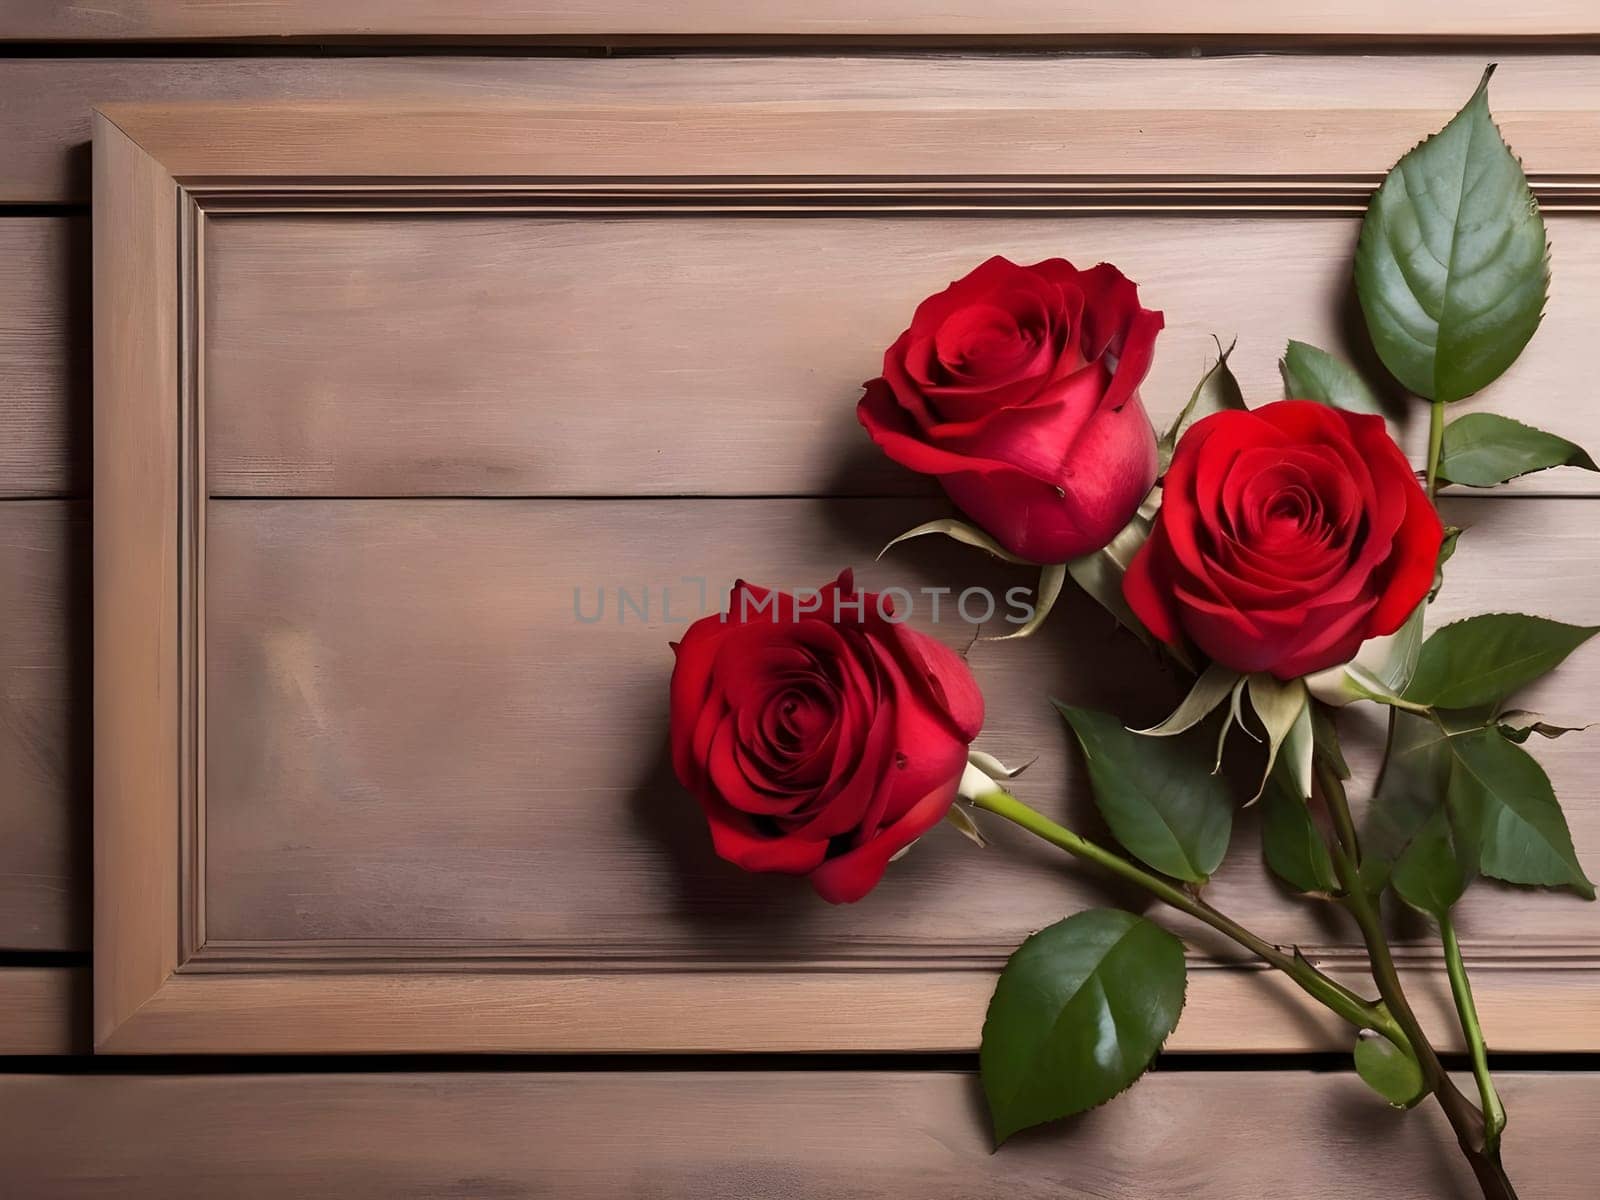 Nature's Embrace. Wooden Frame with Red Rose Blossoms.